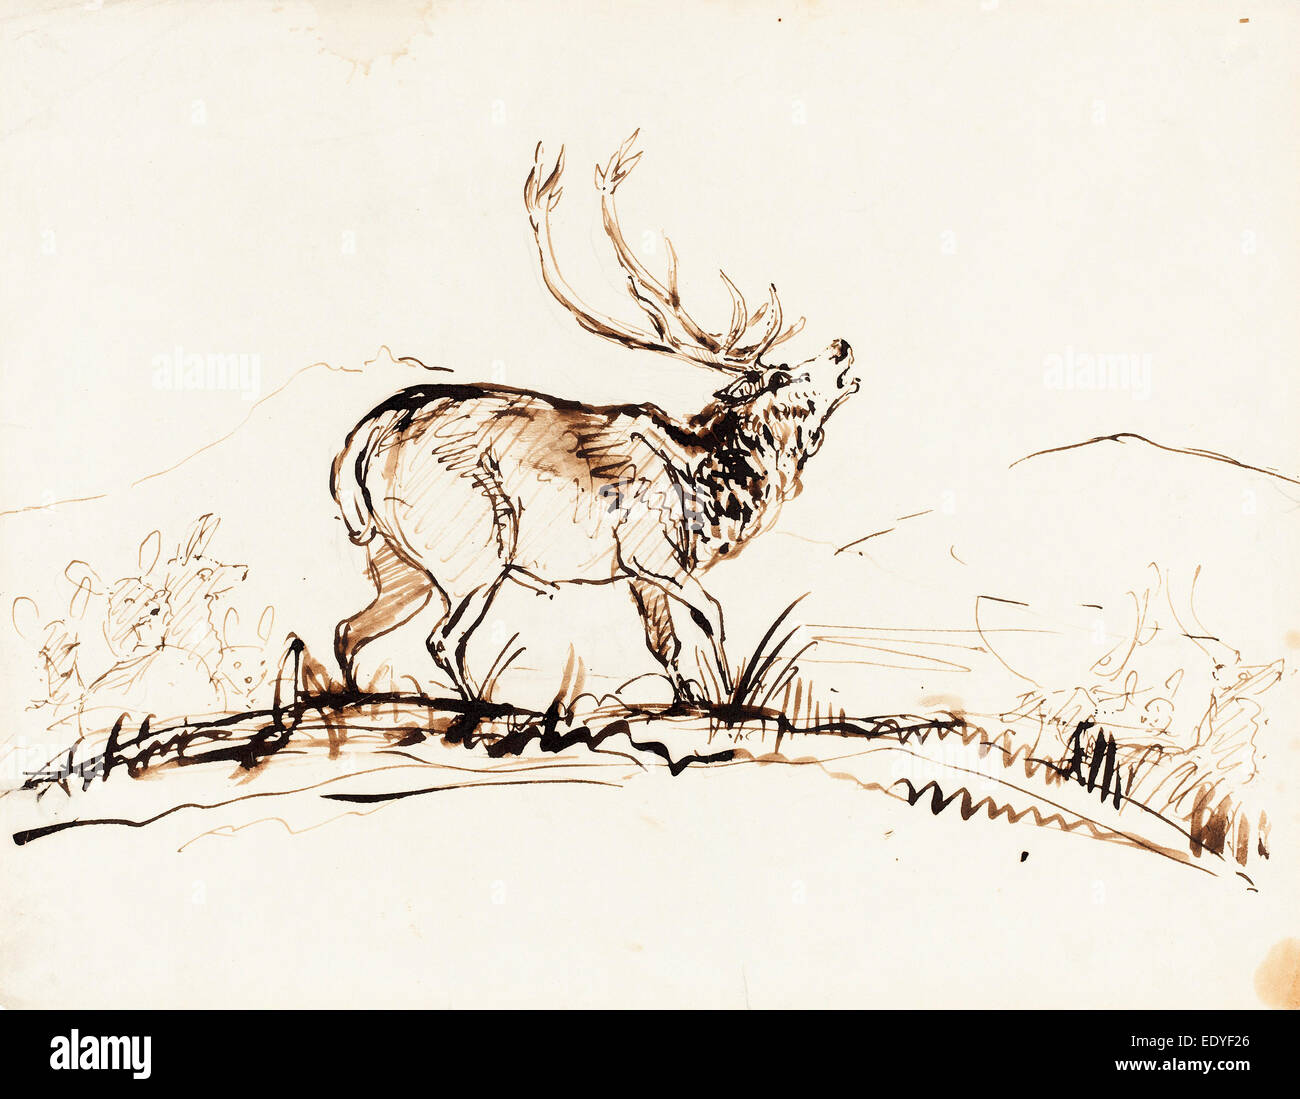 Sir Edwin Landseer (British, 1802 - 1873), A Bellowing Stag, probably 1840-1850, pen and brown ink over graphite Stock Photo